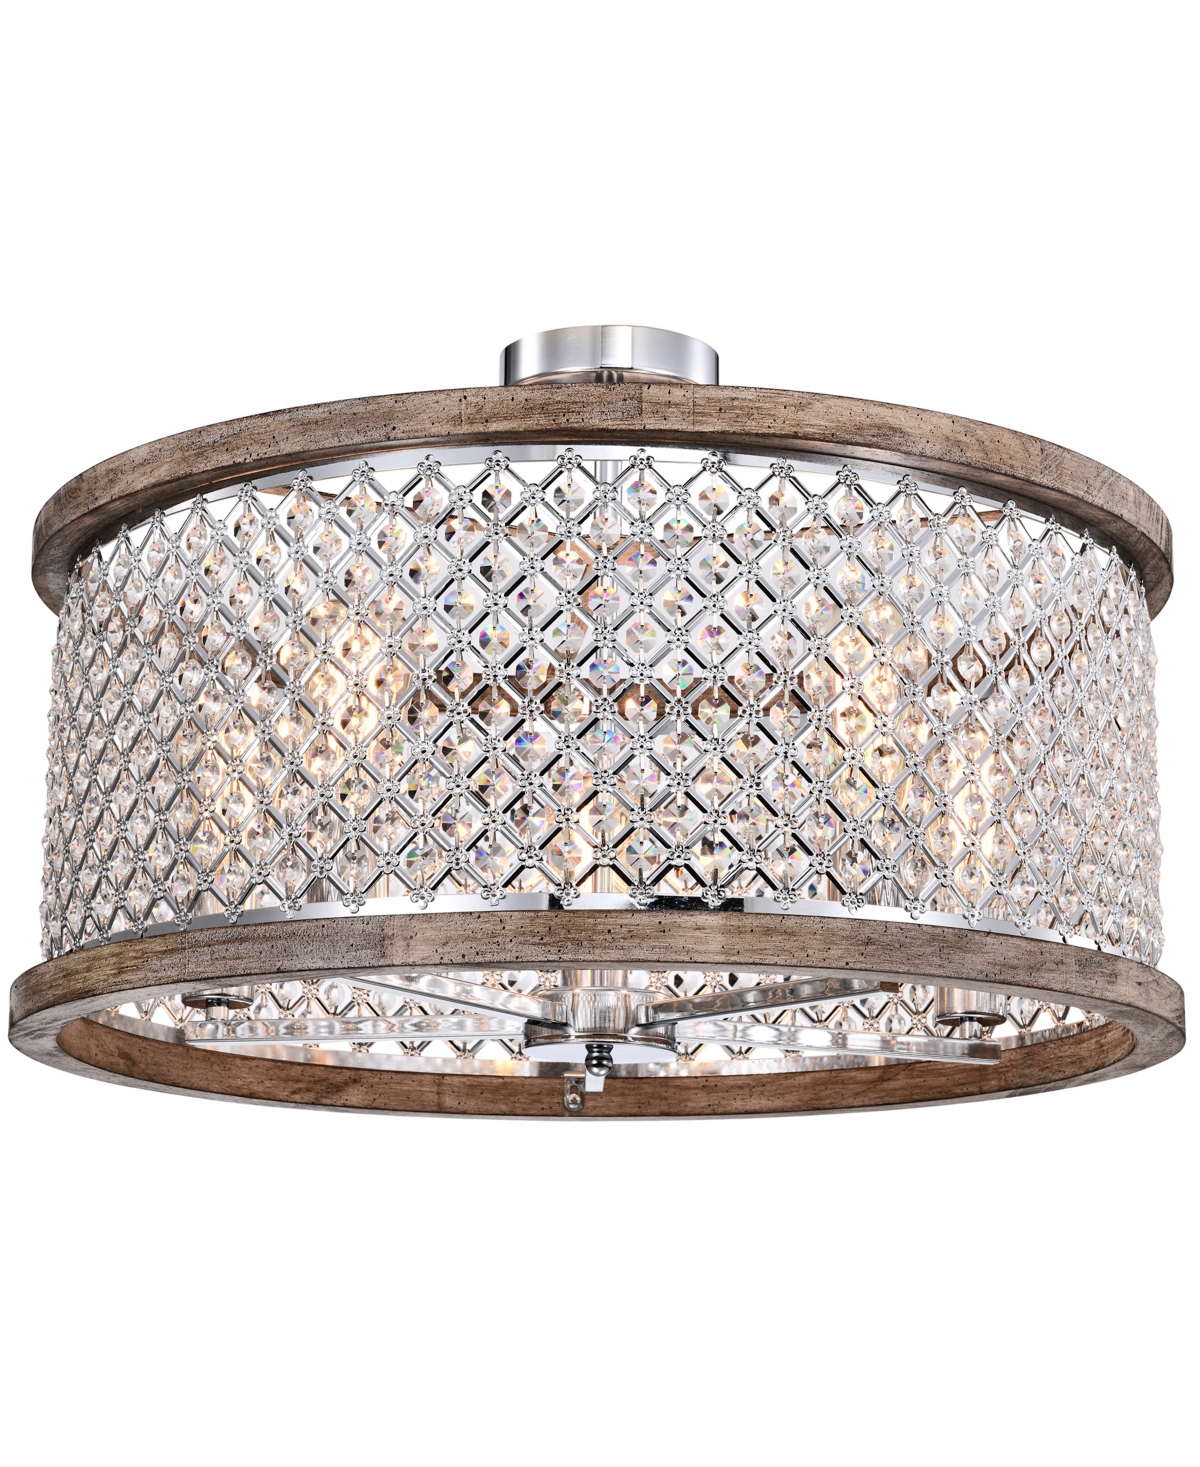 Home Accessories Olyvia 24" Indoor Finish Semi-flush Mount Ceiling Light With Light Kit In Chrome And Faux Wood Grain